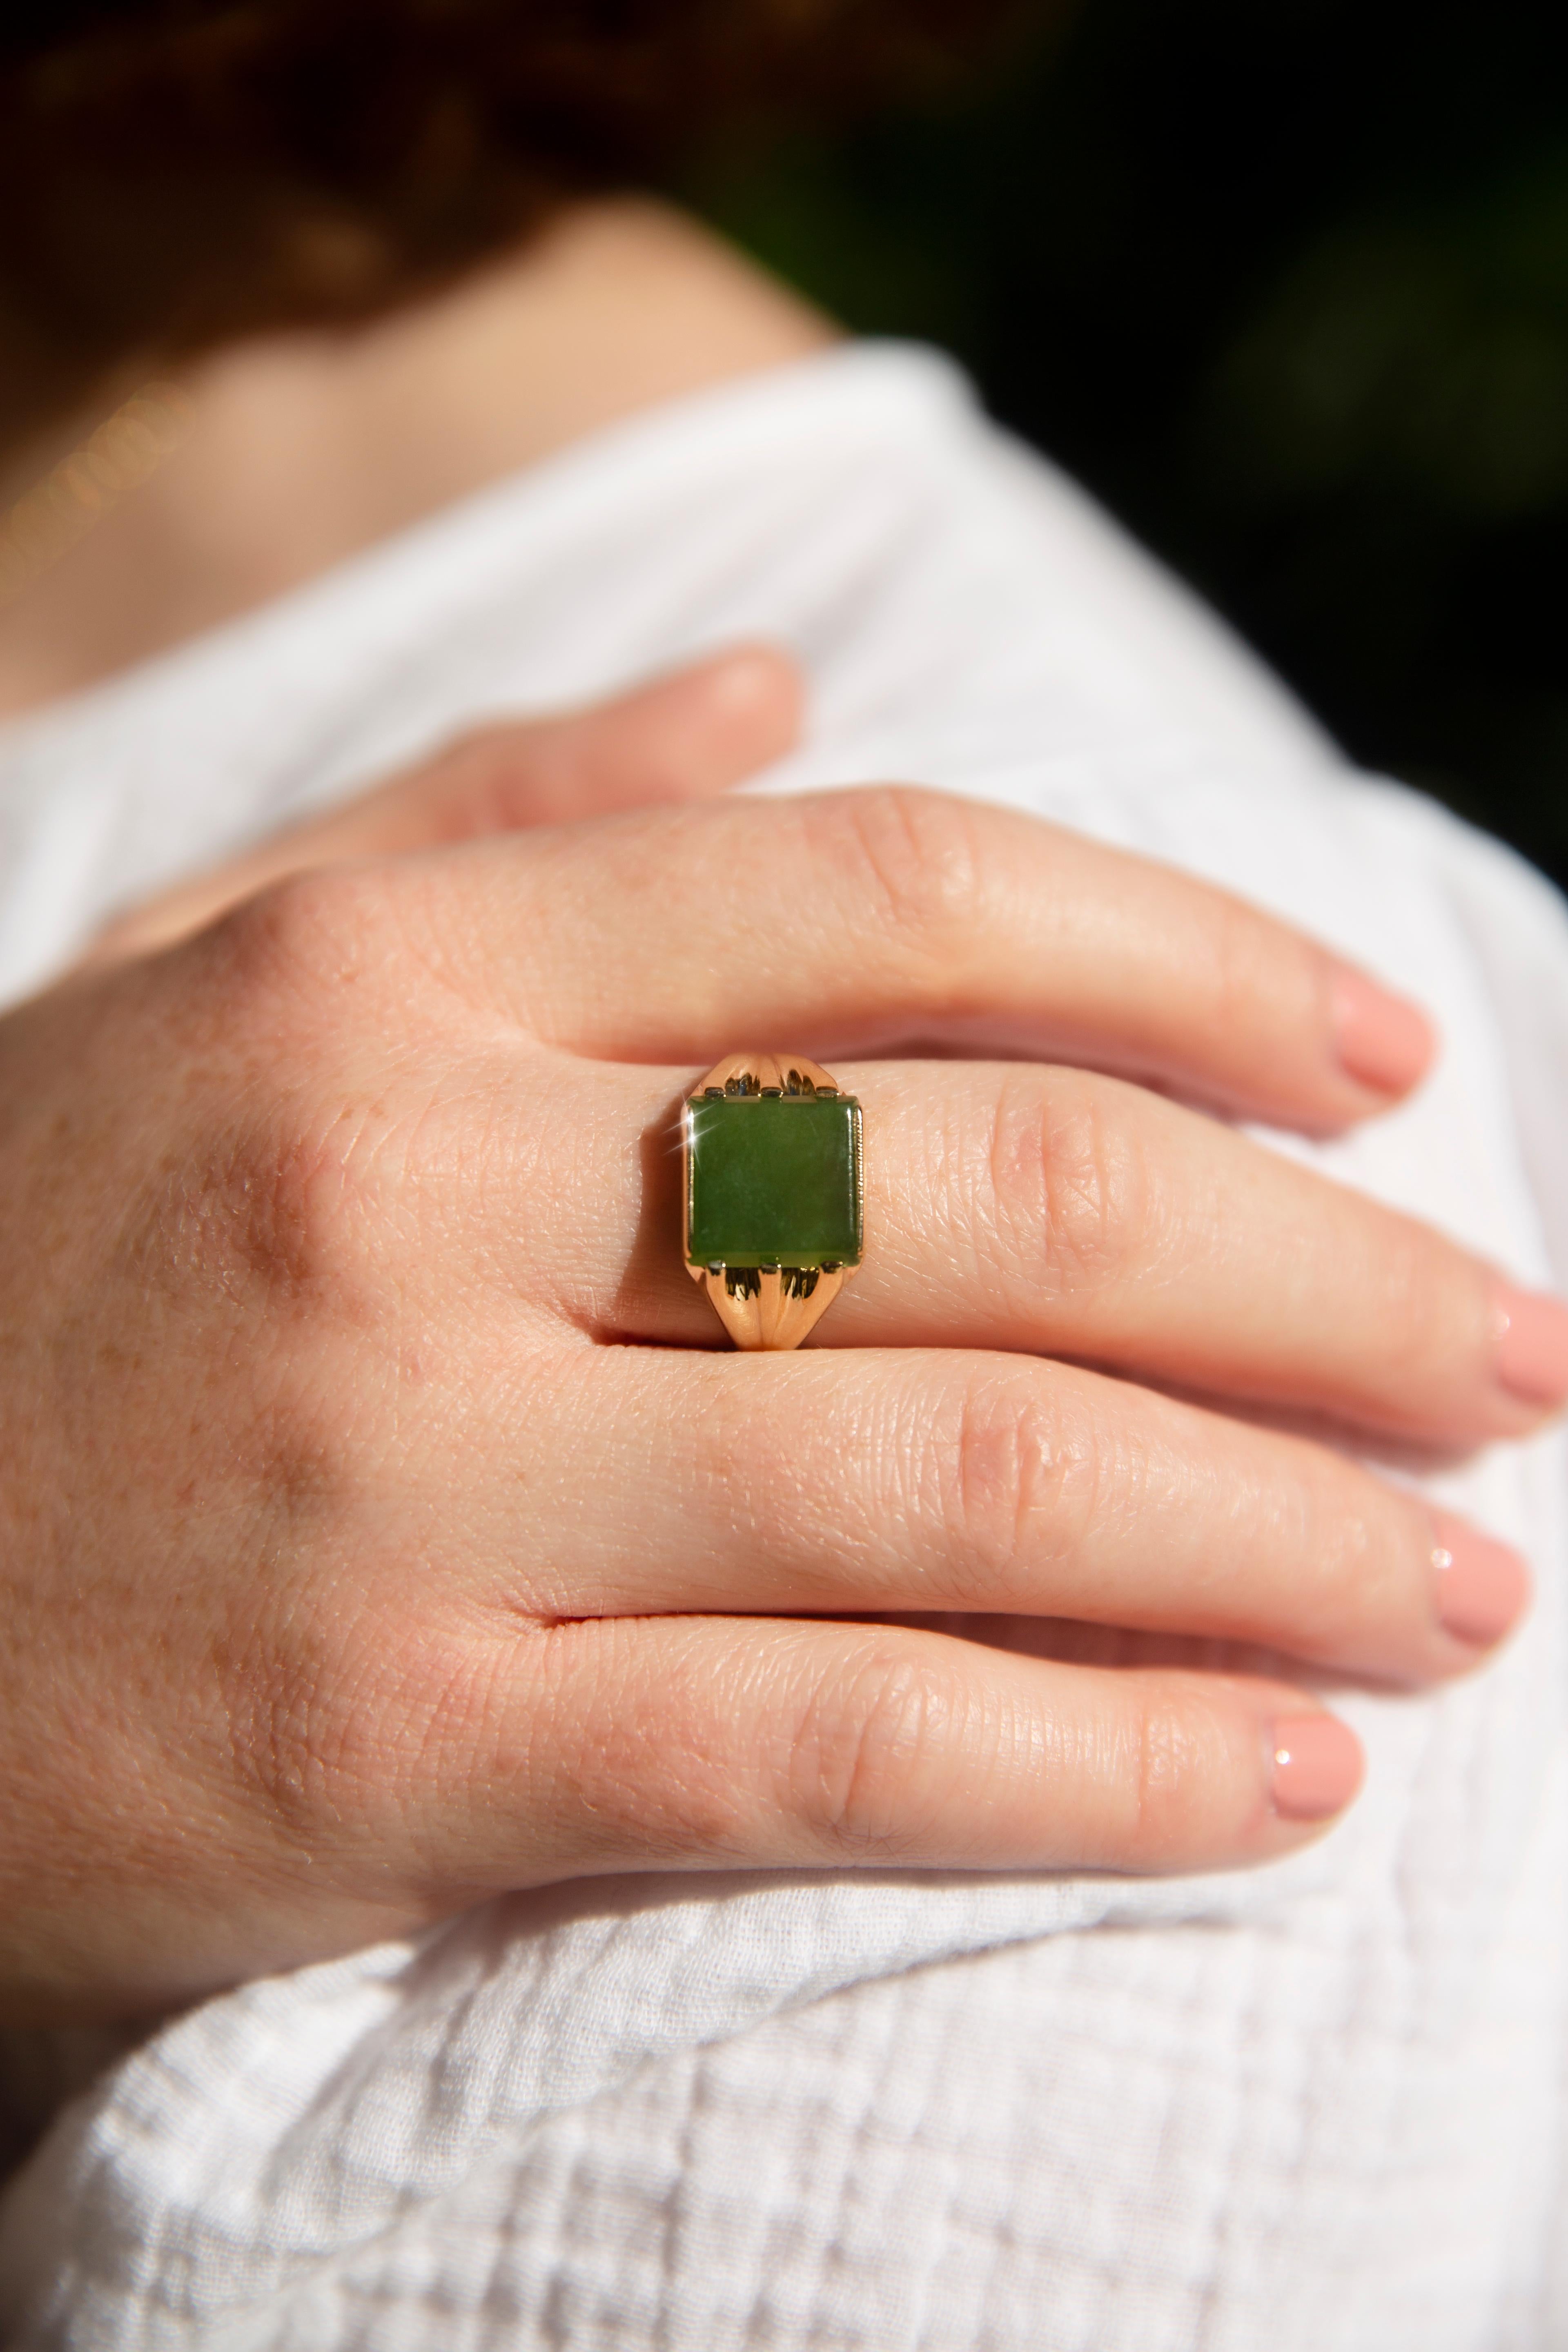 Forged in 9 carat yellow gold, this alluring vintage 1970s ring features an square-shaped nephrite jade in a partial rubover setting and claw setting on grooved shoulders. This lovely piece has been named The Sable Ring. She is the evokes strong